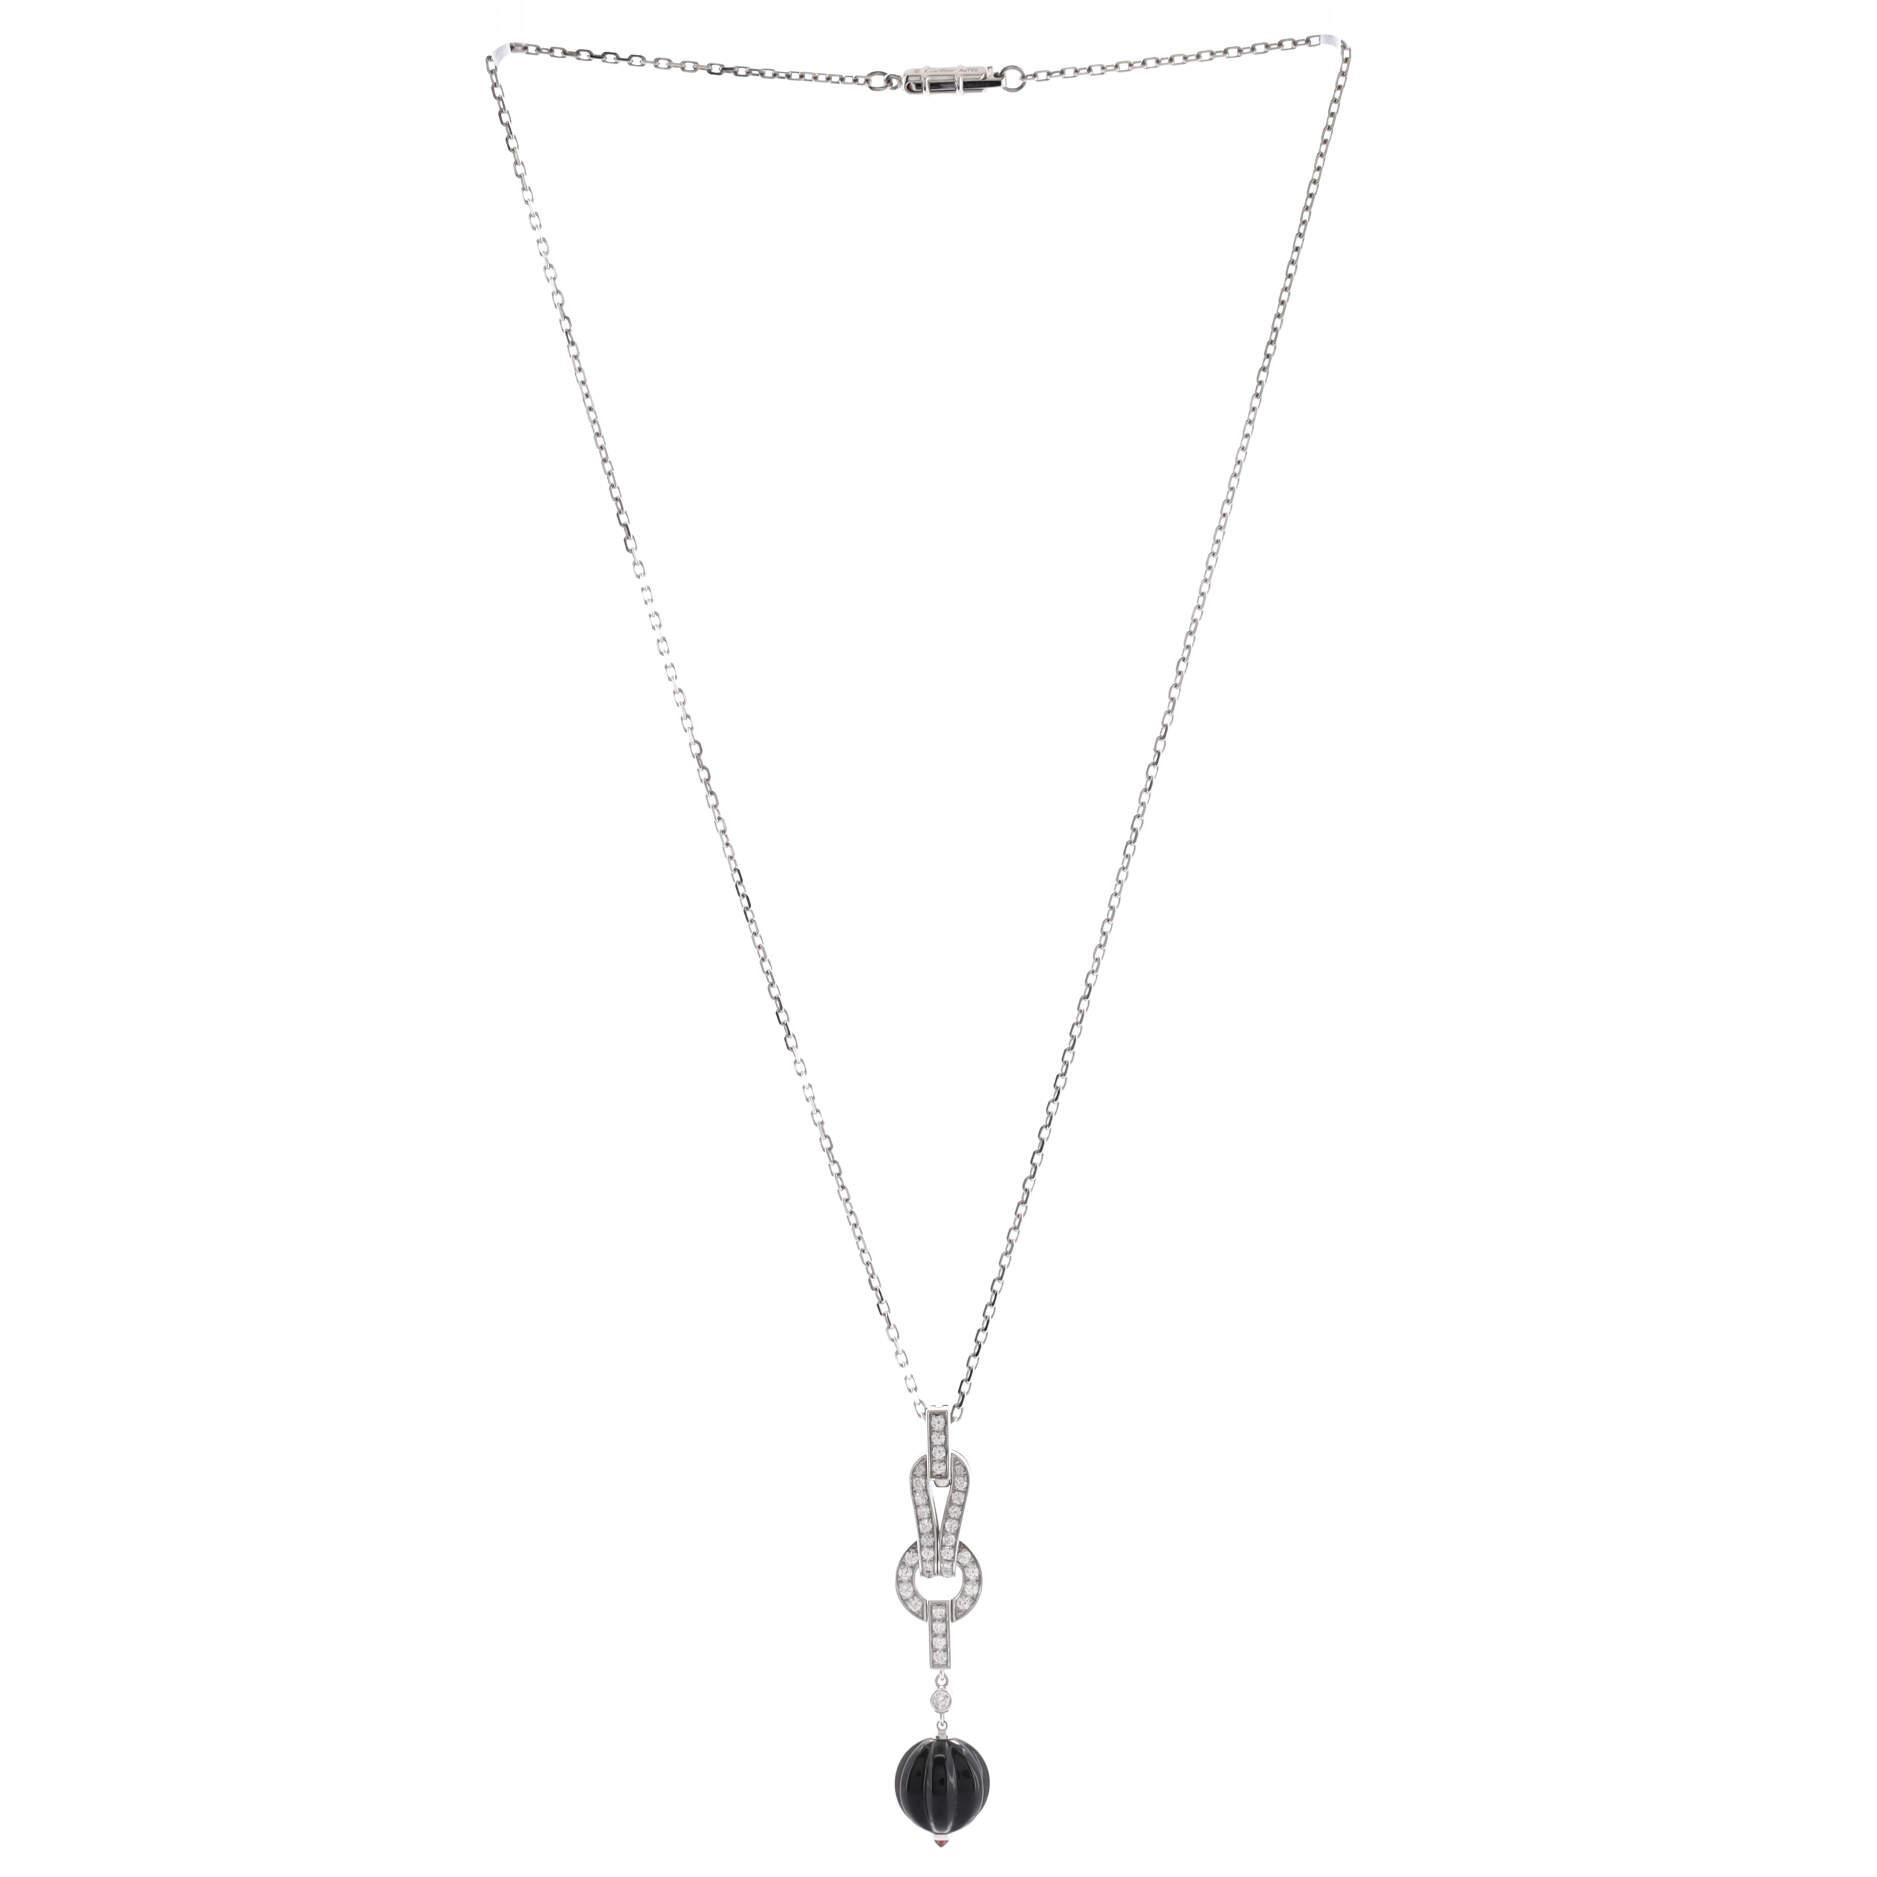 Cartier Agrafe Drop Pendant Necklace 18K White Gold with Diamonds, Onyx In Good Condition For Sale In New York, NY